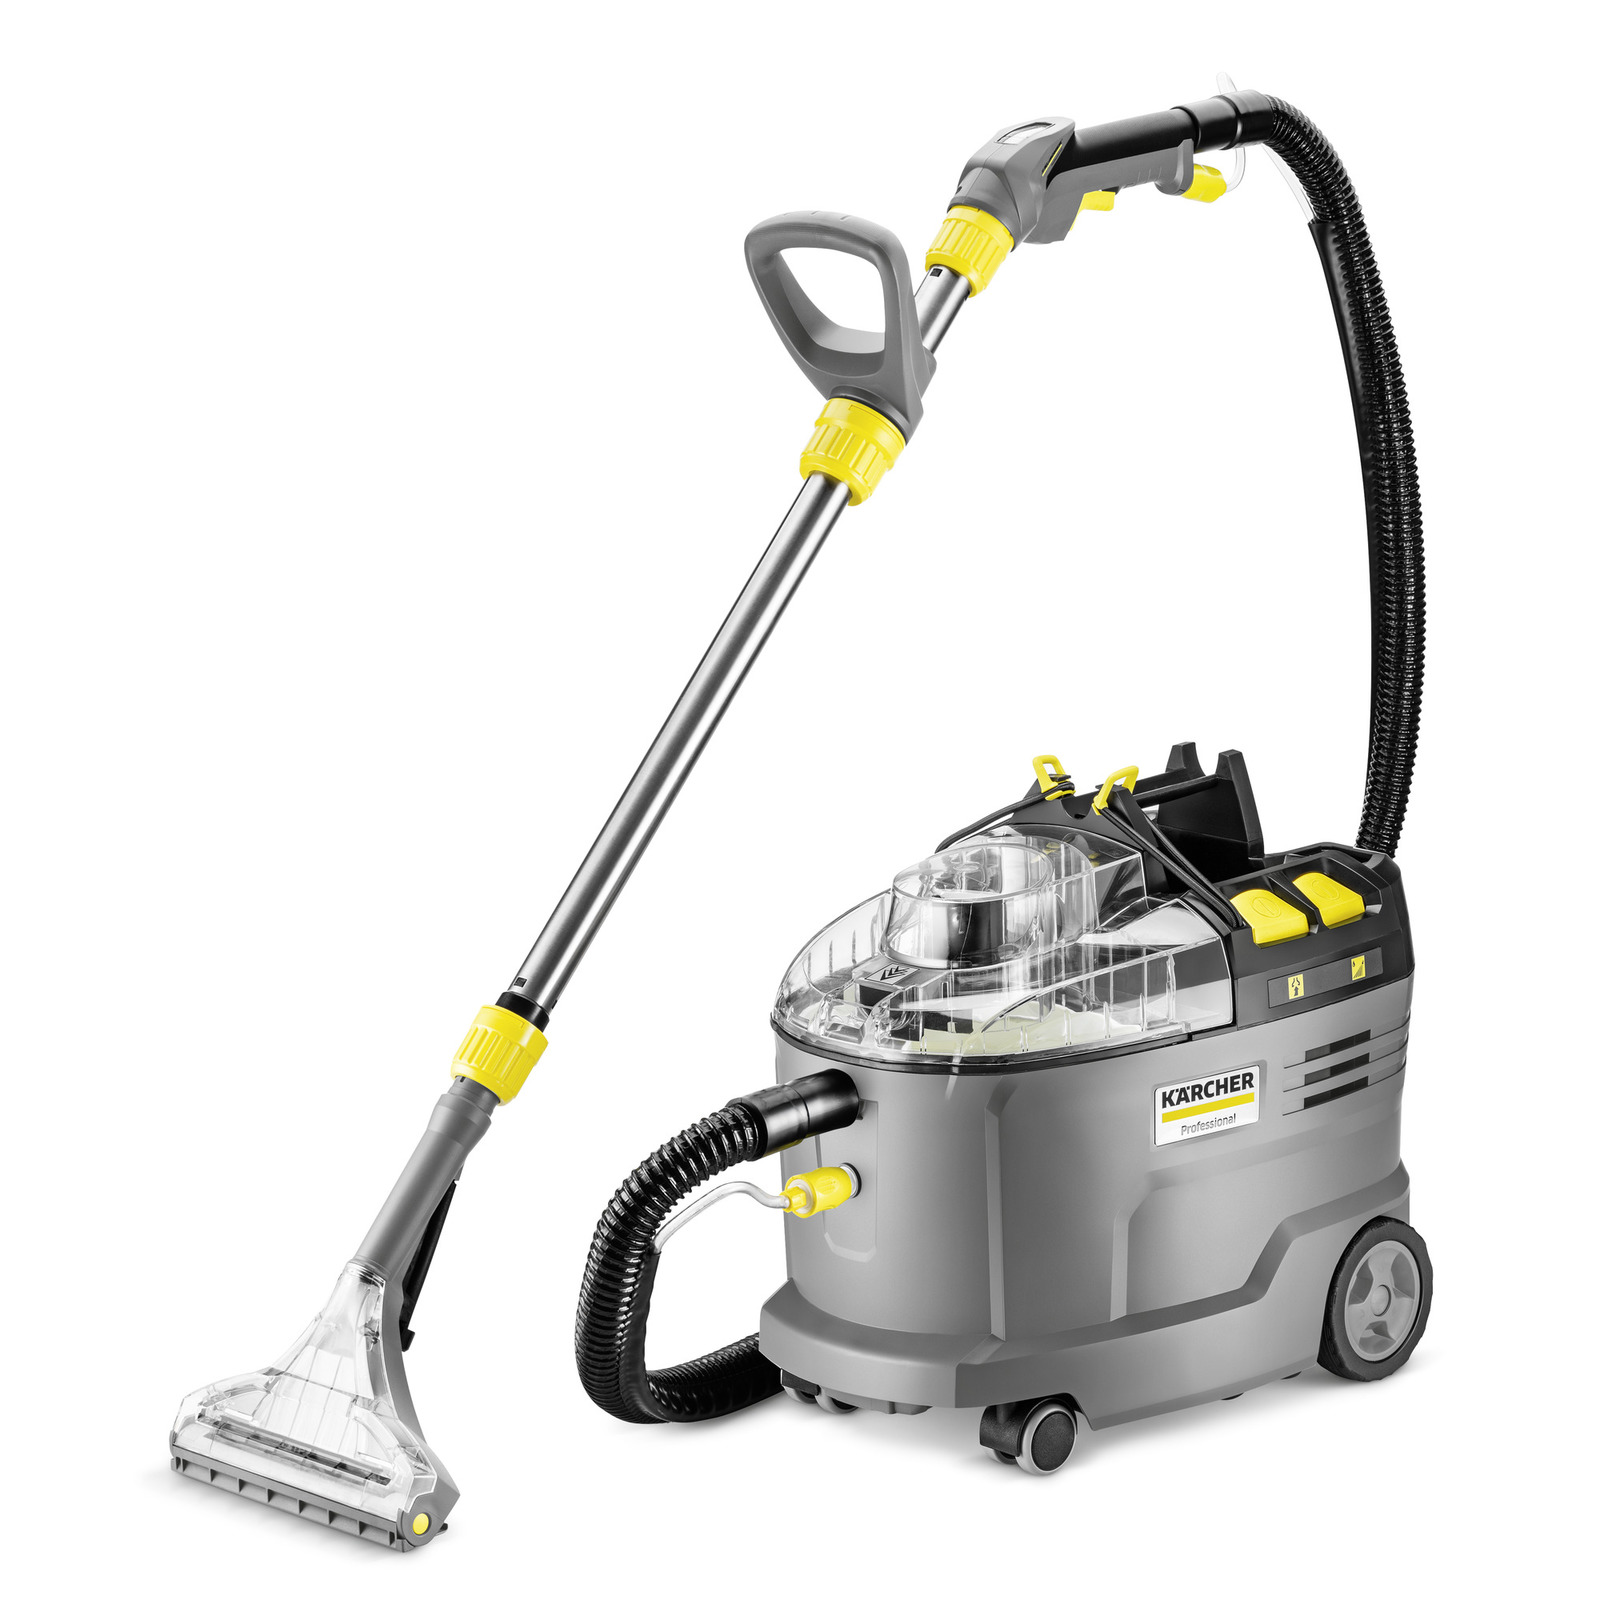 KARCHER Puzzi 8/1C Spray Carpet Extraction upholstery cleaning powerful machine 